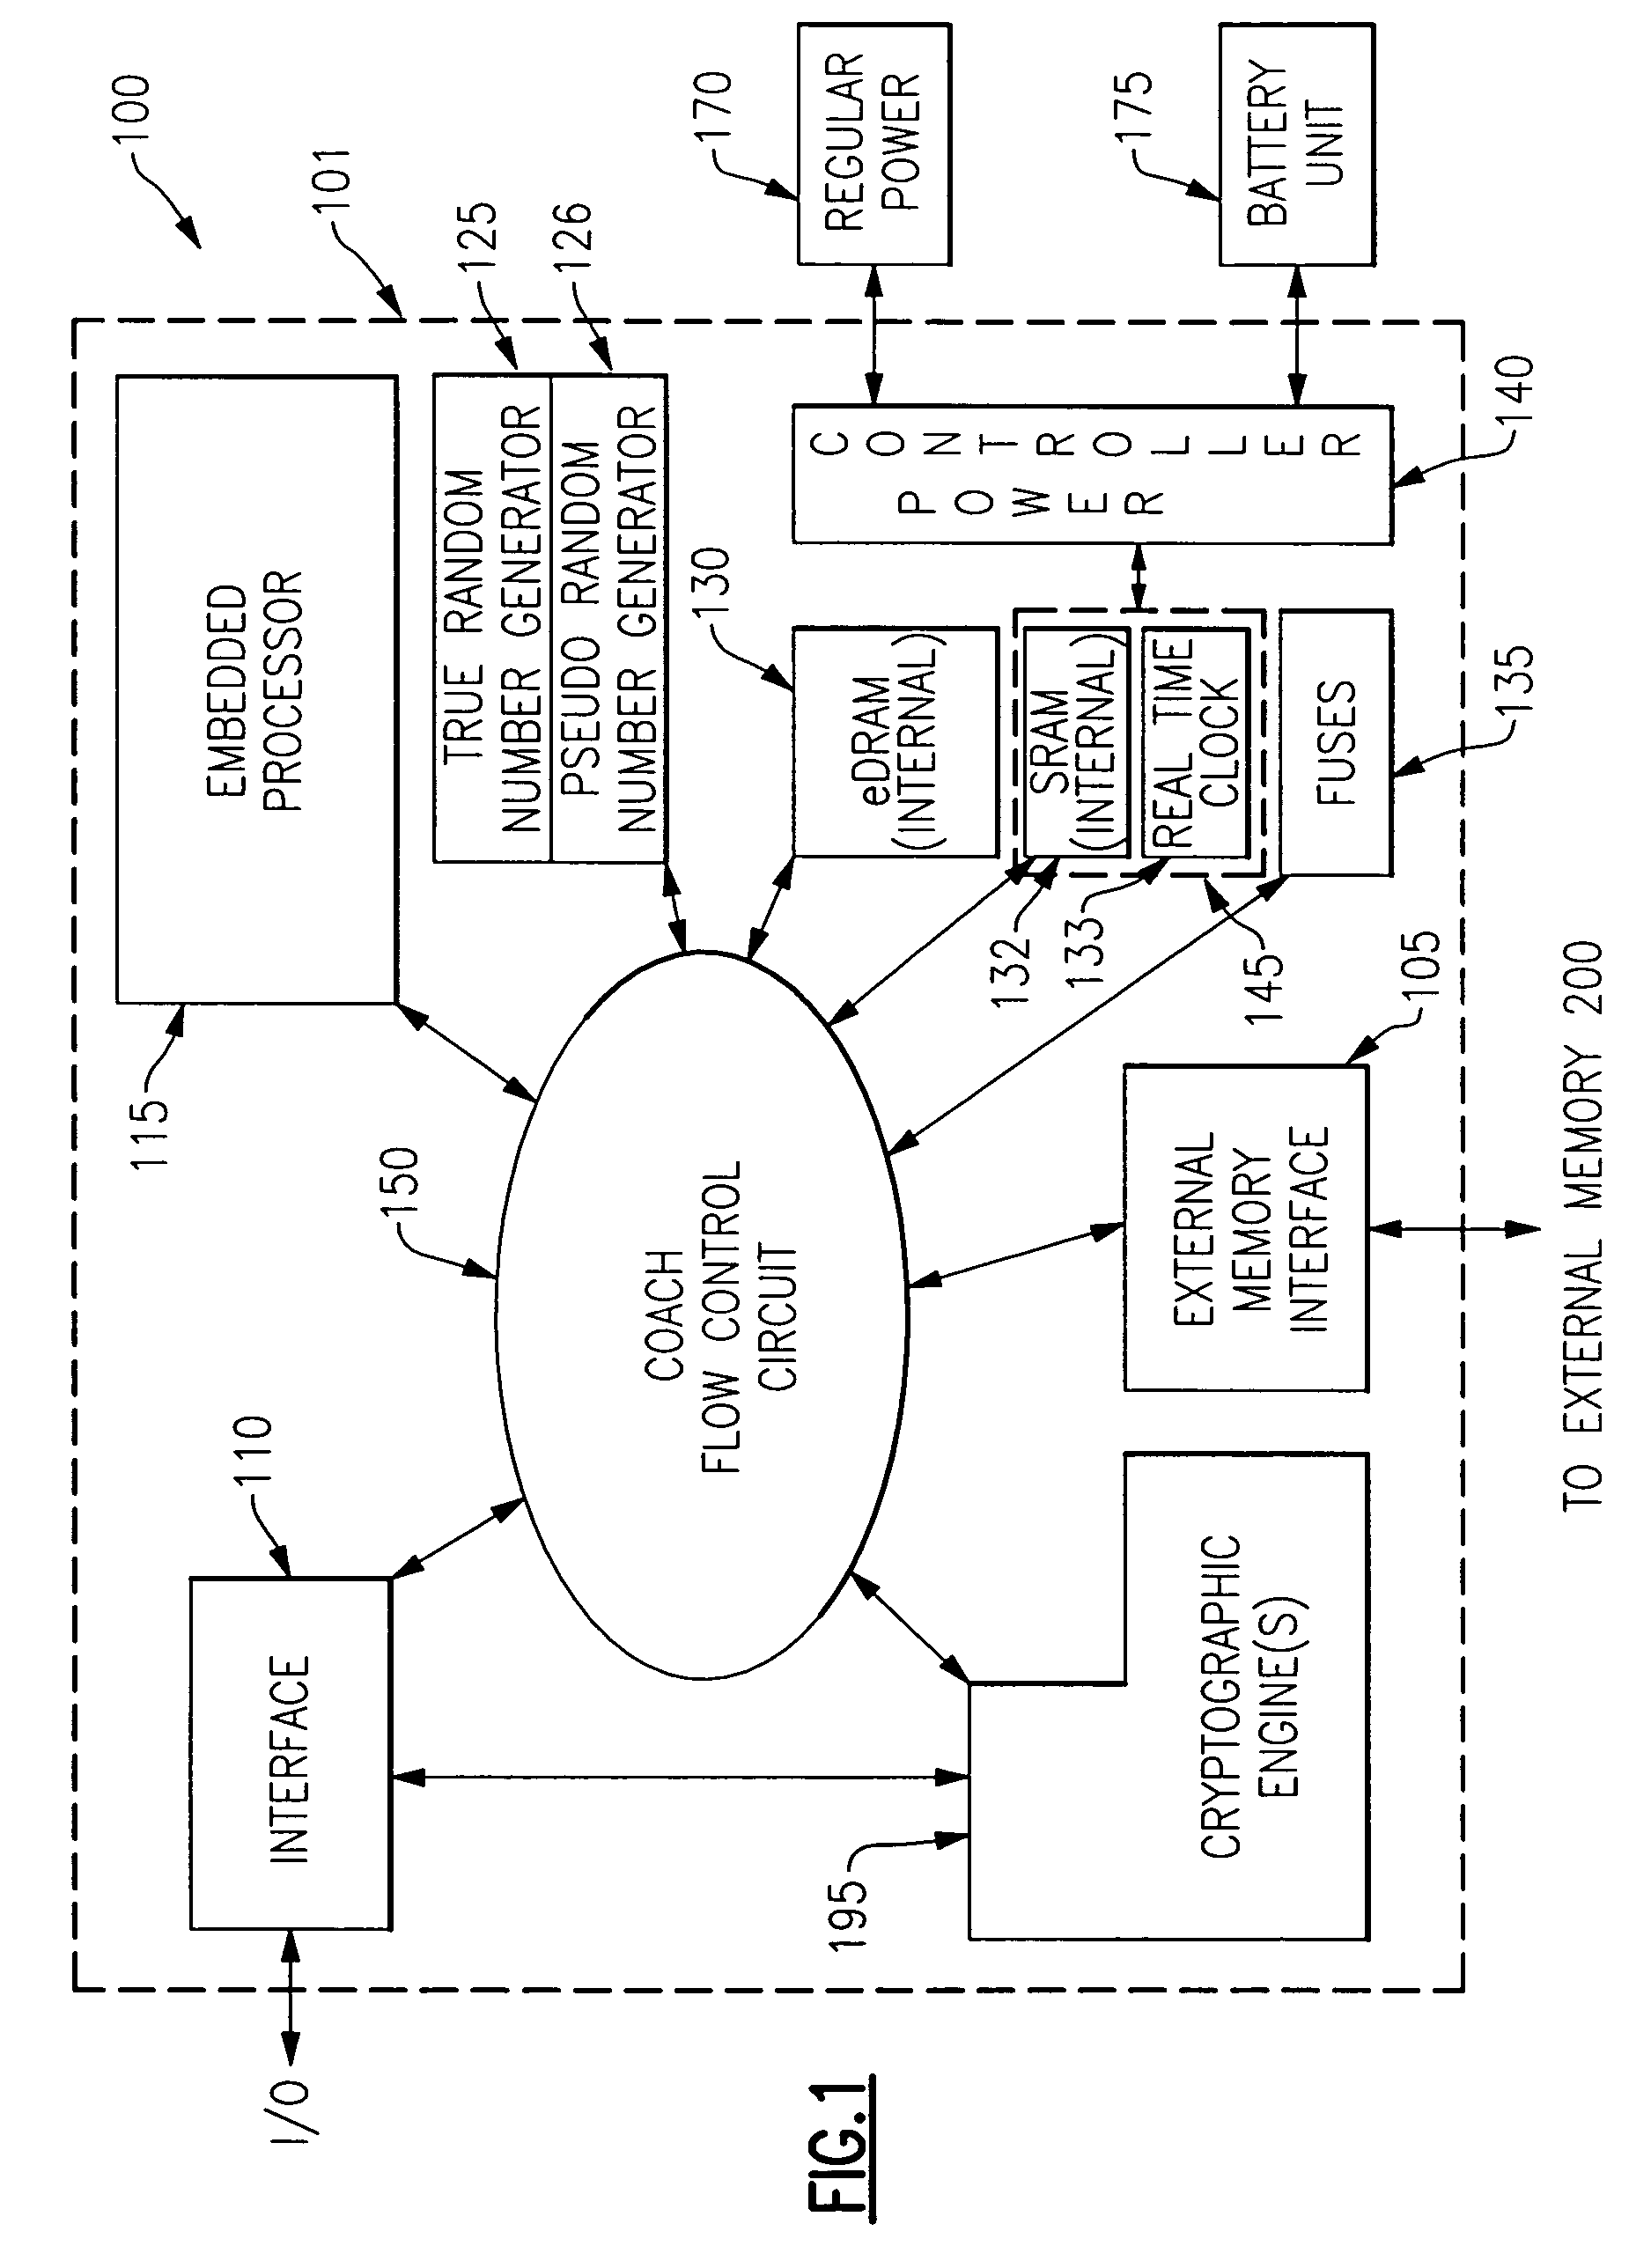 System and method for processing by distinct entities securely configurable circuit chips